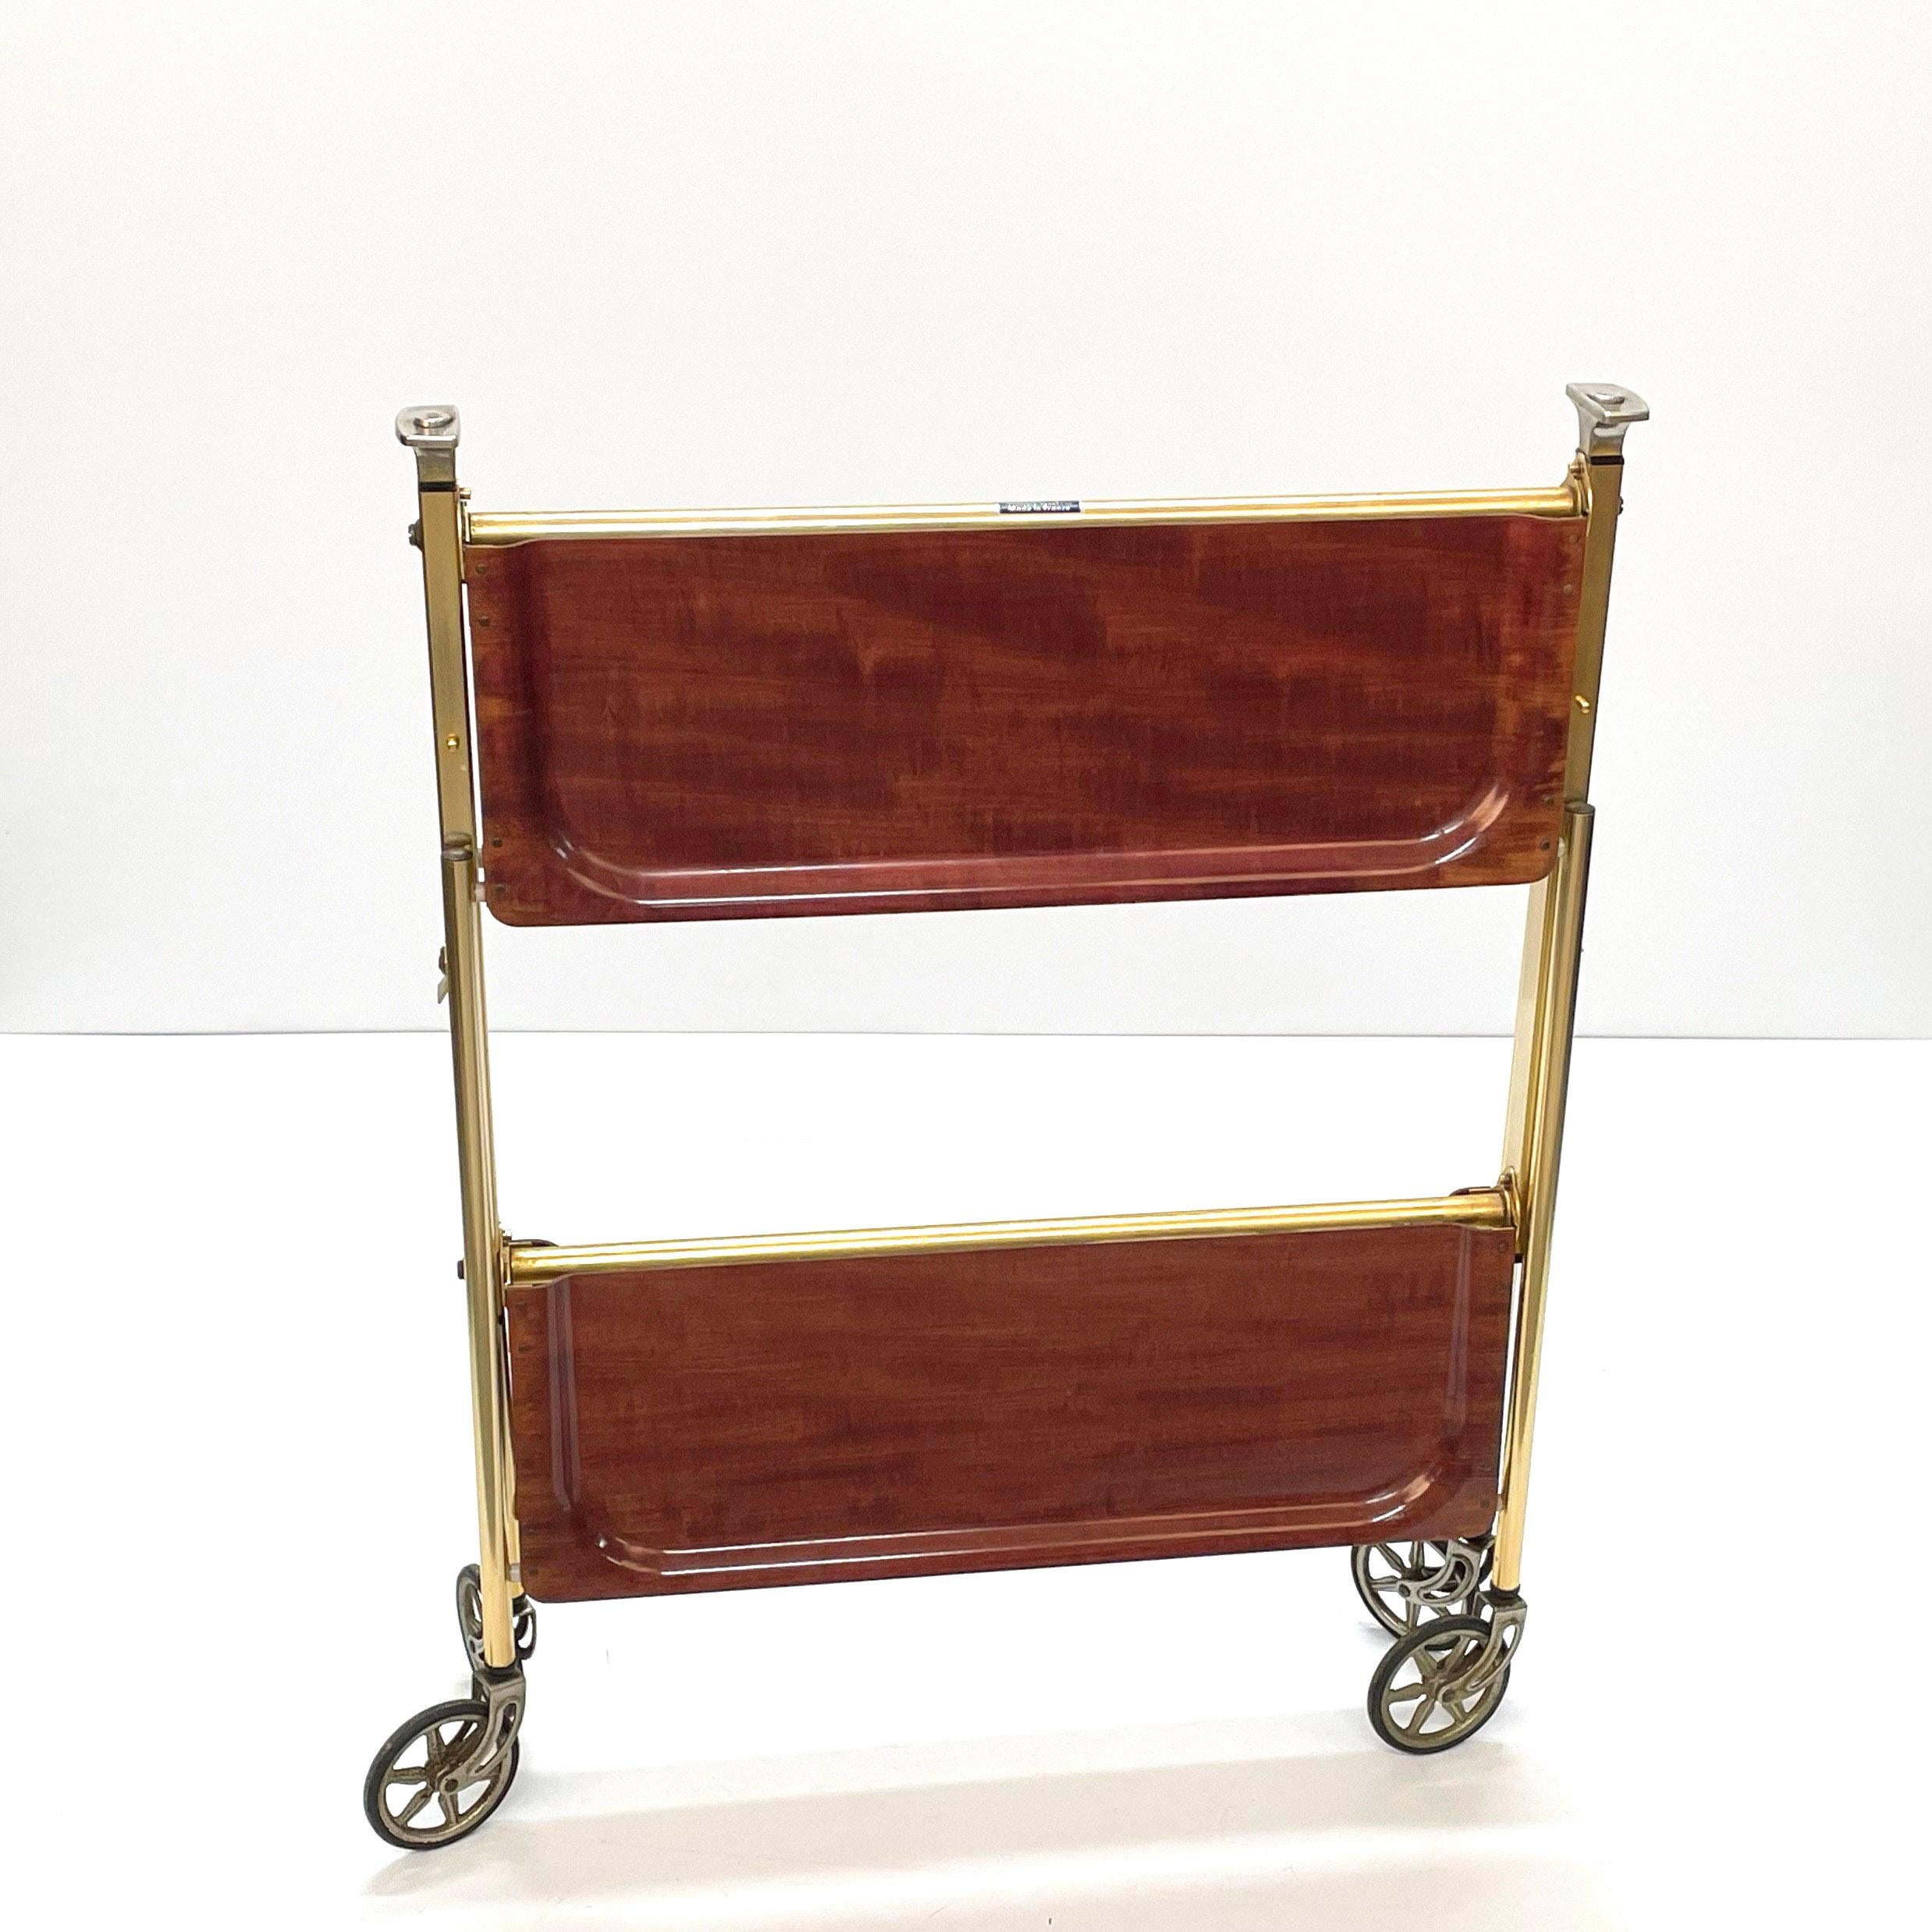 Textable Midcentury Foldable Trolley Wood and Golden Aluminium Bar Cart 1950 For Sale 1